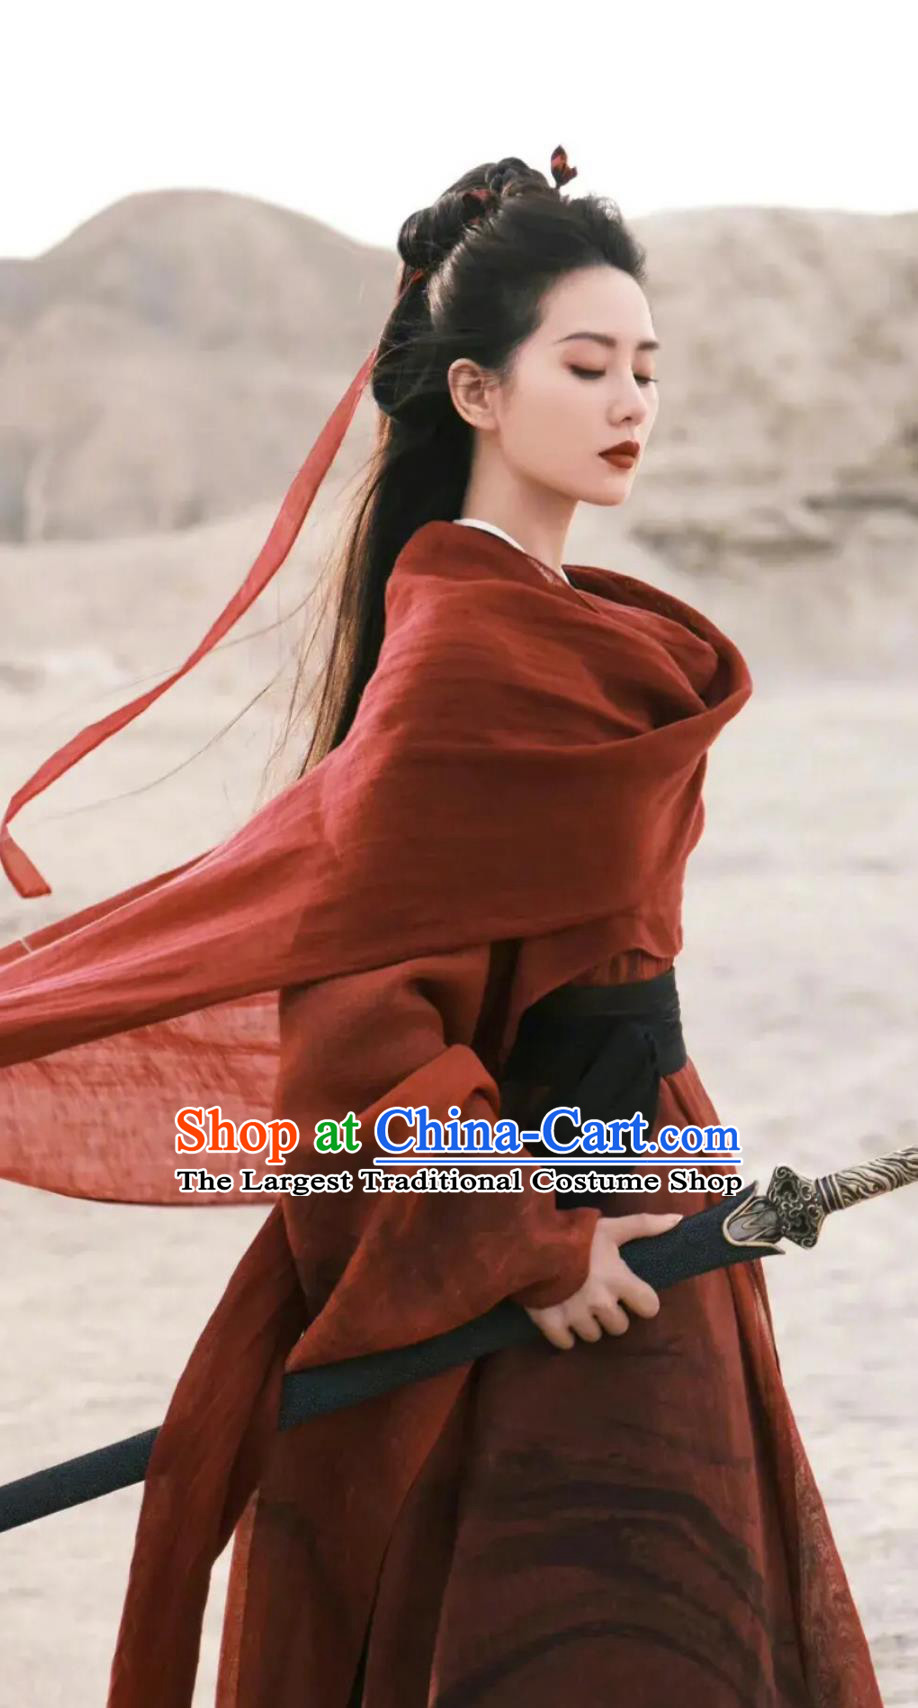 China Wuxia Kungfu Clothing 2023 TV Series A Journey To Love Swordswoman Ren Ru Yi Red Dress Ancient Chinese Female Assassin Costume